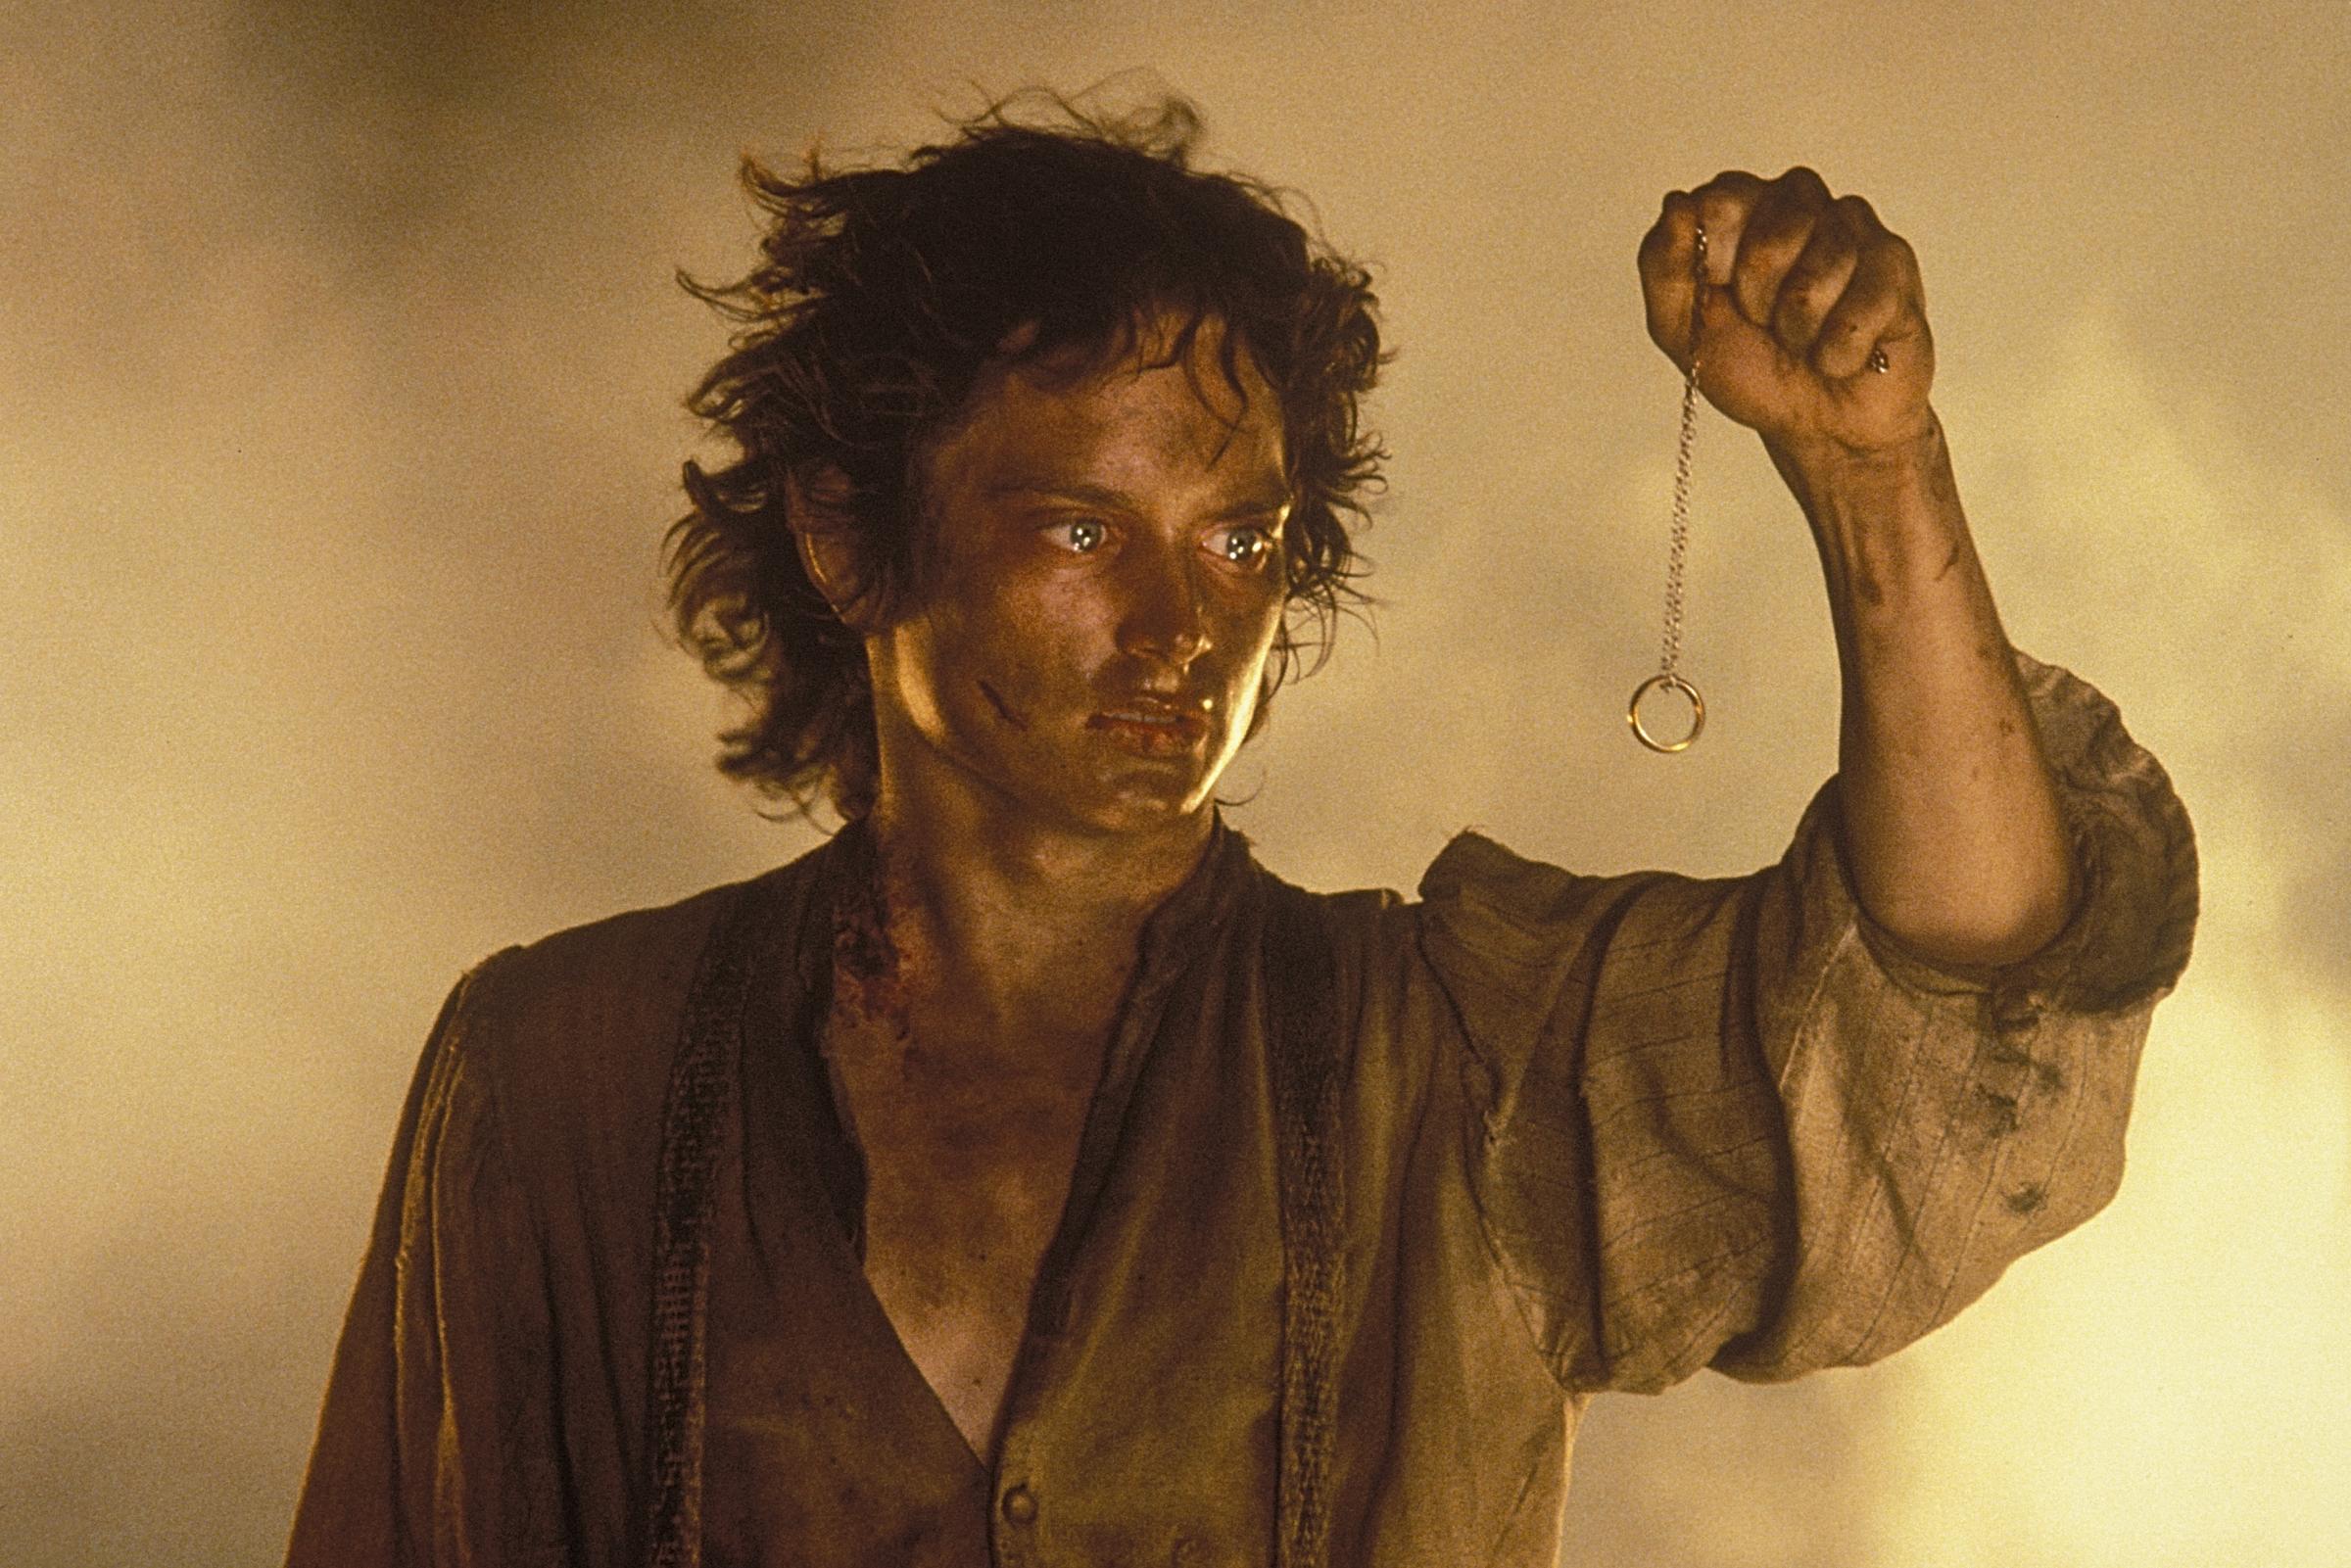 Elijah Wood as Frodo Baggins in 'The Lord of The Rings: The Return of The King.'